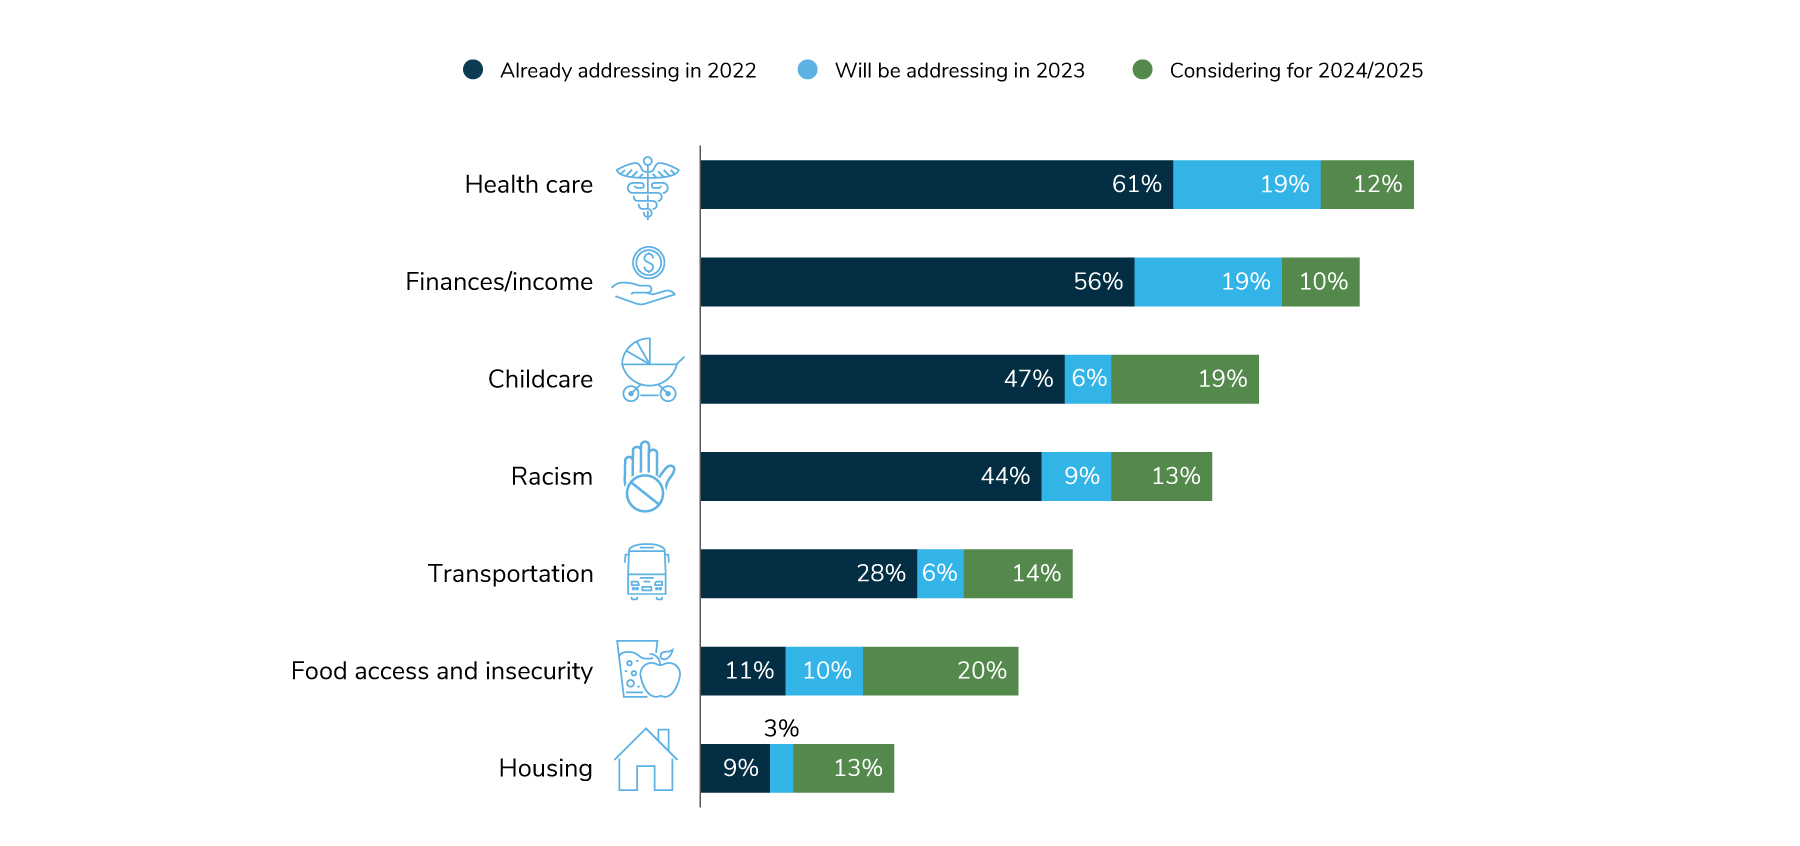 Employers are (or will be in 2023) addressing social determinants of health, including: health care (80%), finances/income (75%), childcare (53%), racism (53%) and transportation (34%).